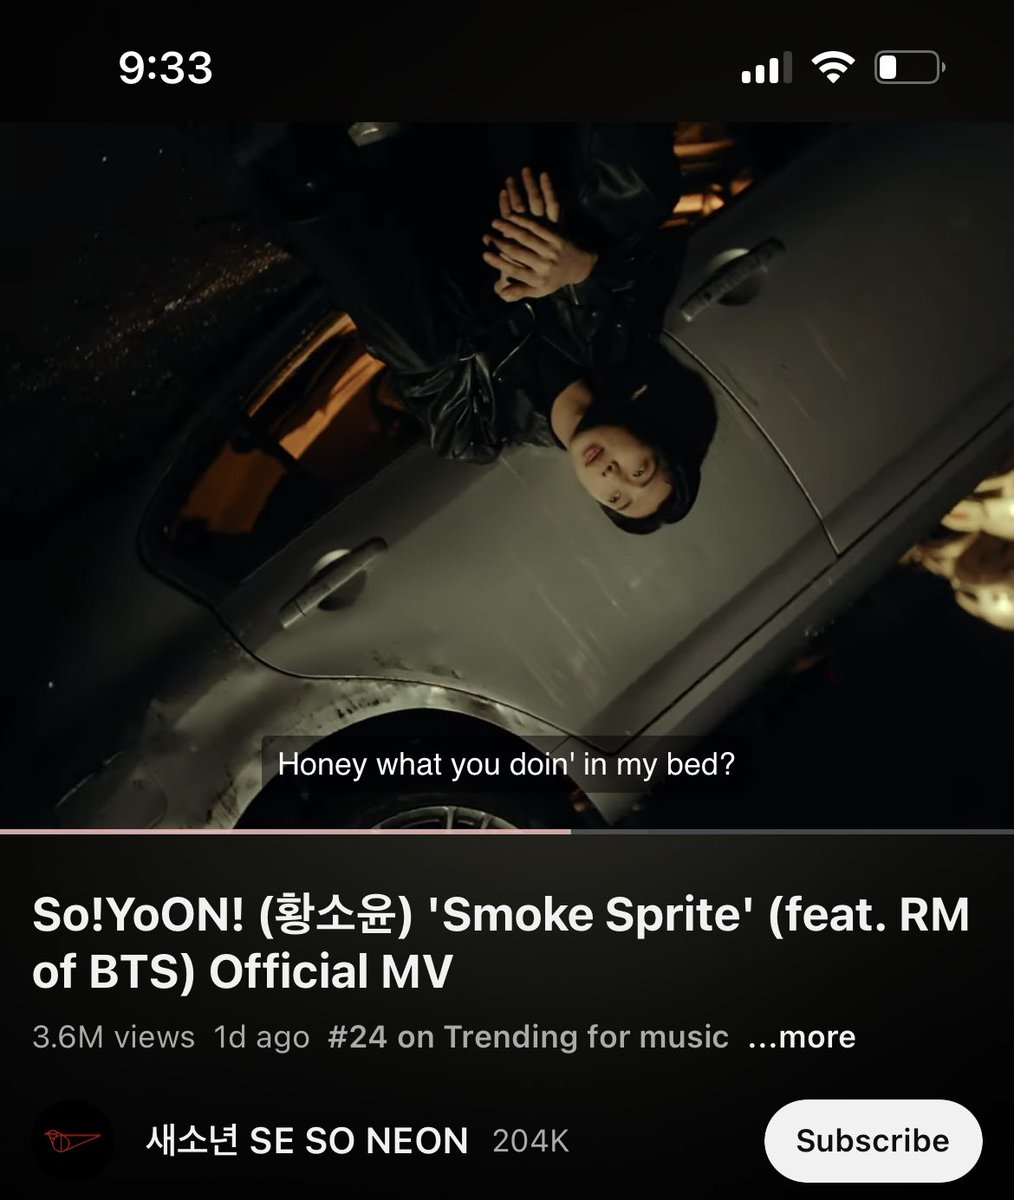 LETS GO! 🔥💜

CHALLENGE:
#SmokeSpriteftRM 
#SmokeSpritexRM
#SmokeSprite_D1

If you got tagged, you must QRT this with your SS Streaming on YT don't break this chain and tag 7 moots.
@_taesope_ @BTSsevenheaven @ddaengonit @MinZenaidaL @taejoonutopia @MinYoonker @sherishjimin